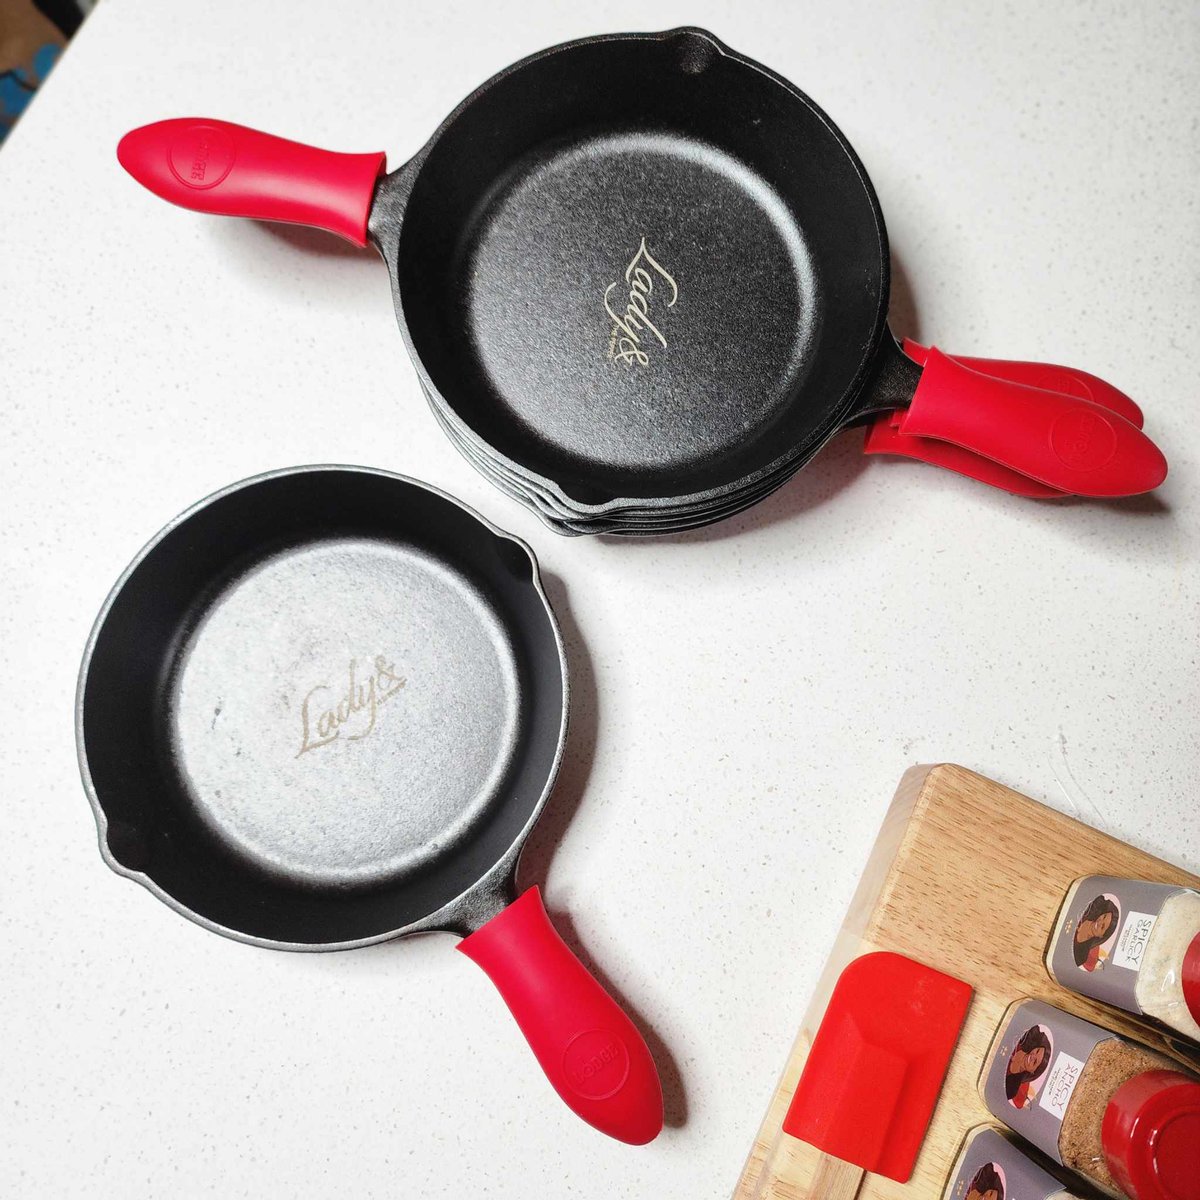 My 8” #castiron “Lady And The Pepper Pans” are avail @ ladyandthepepper.shop !
#castironcookware #pepperpan #8inchpan #cookware #lodgecastiron #homecooking #smallbatch #merch #spicyancho #spicygarlick #spicybrine #products #branding #spices #ladyandthepepper #LATPshop🌶️🔥